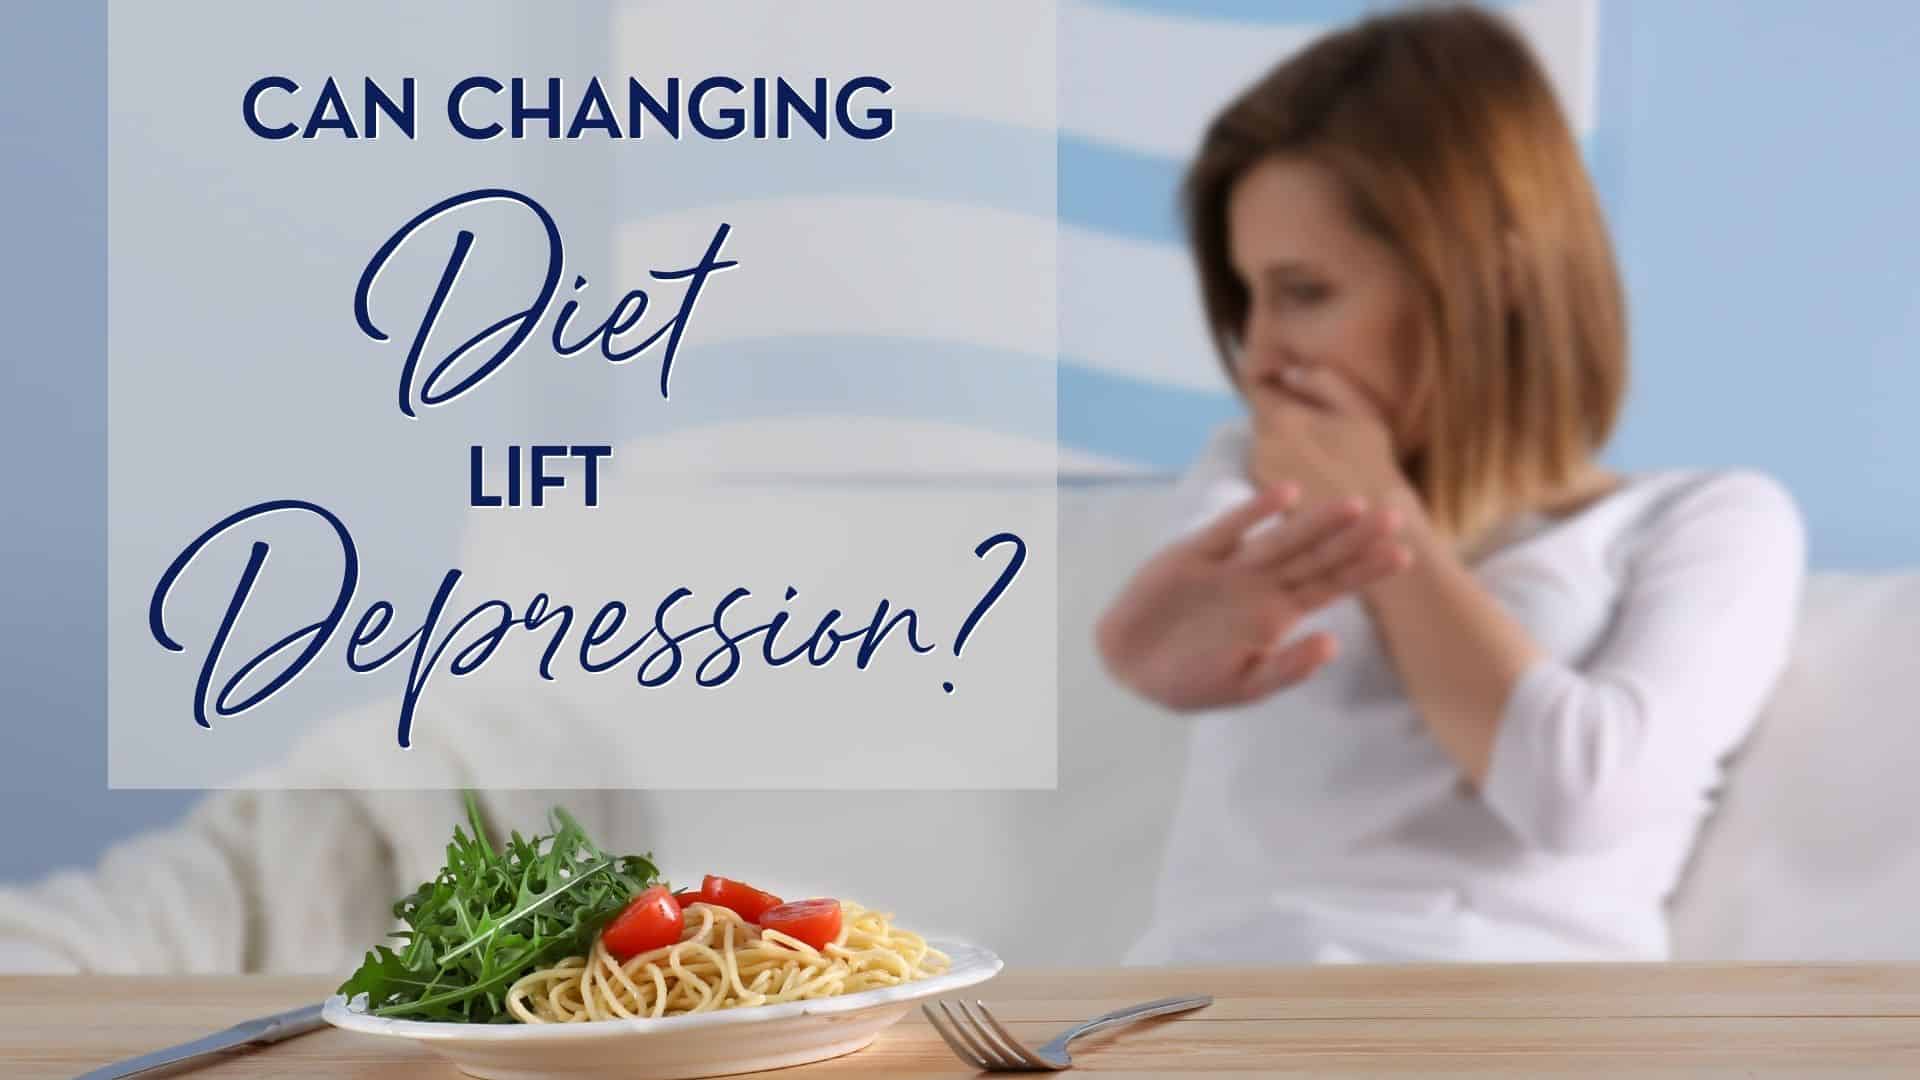 Can Changing Diet Lift Depression?